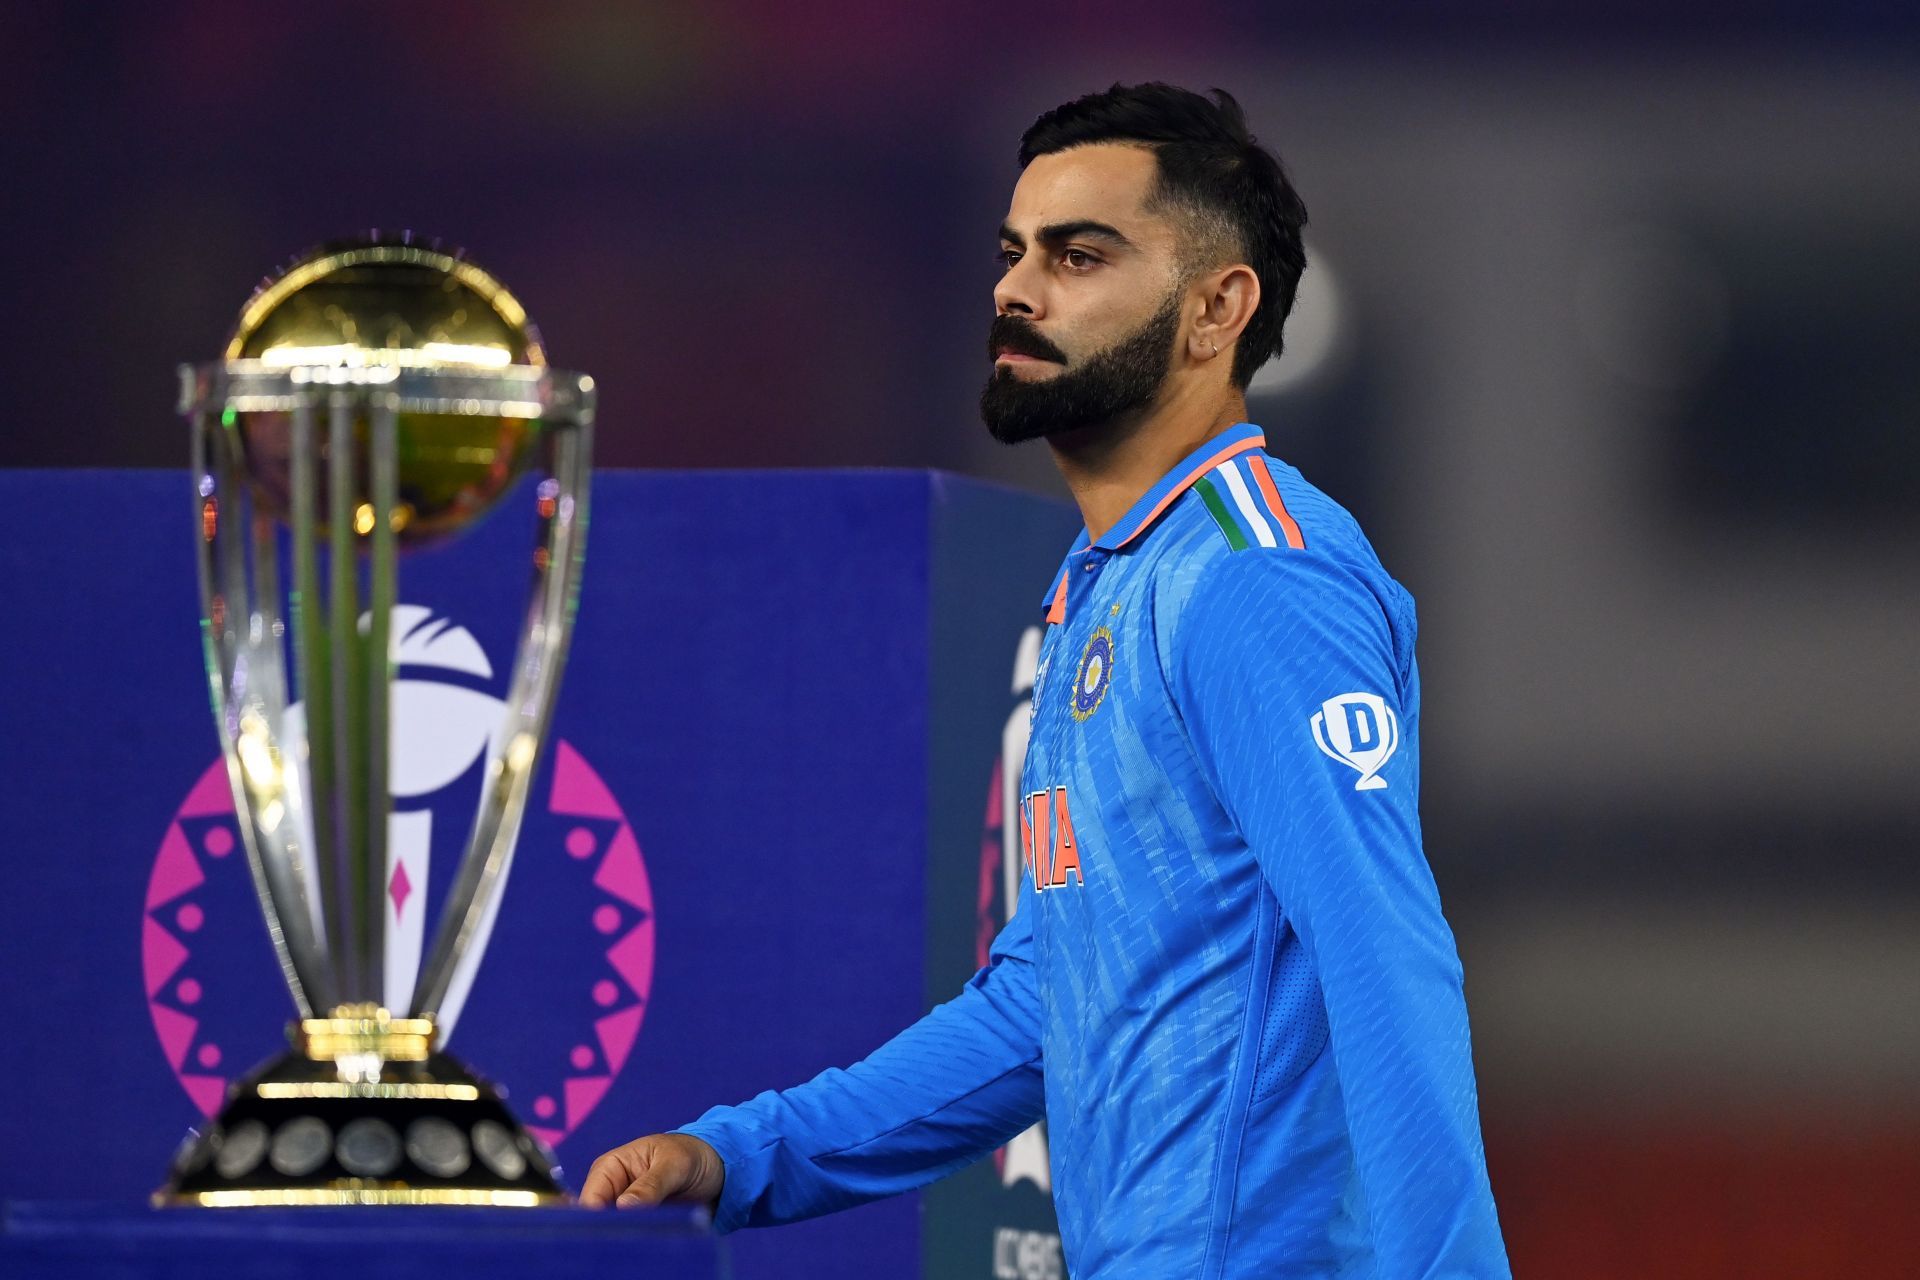 The World Cup trophy eluded Virat Kohli, but other honors are in sight